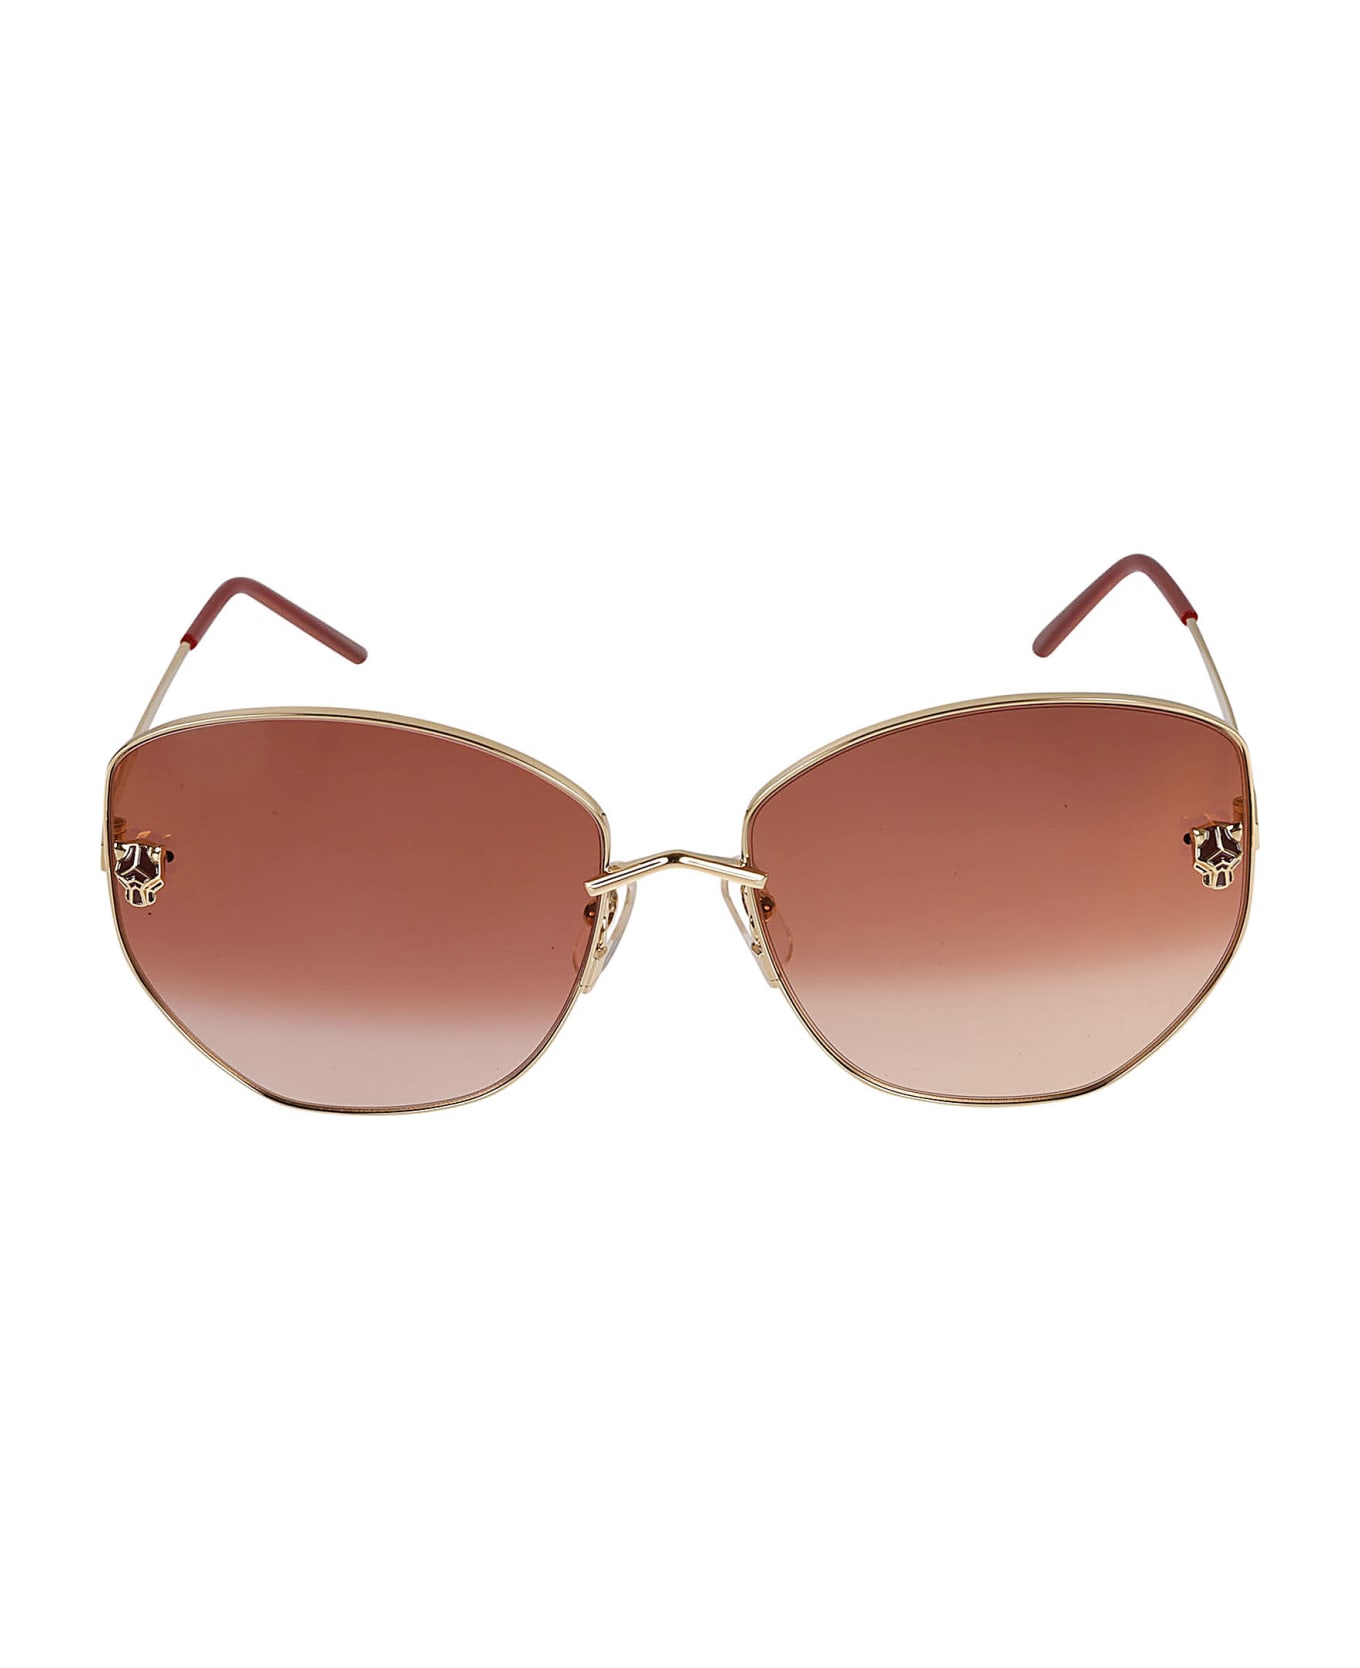 Cartier Eyewear Curve Square Sunglasses - Gold/Red